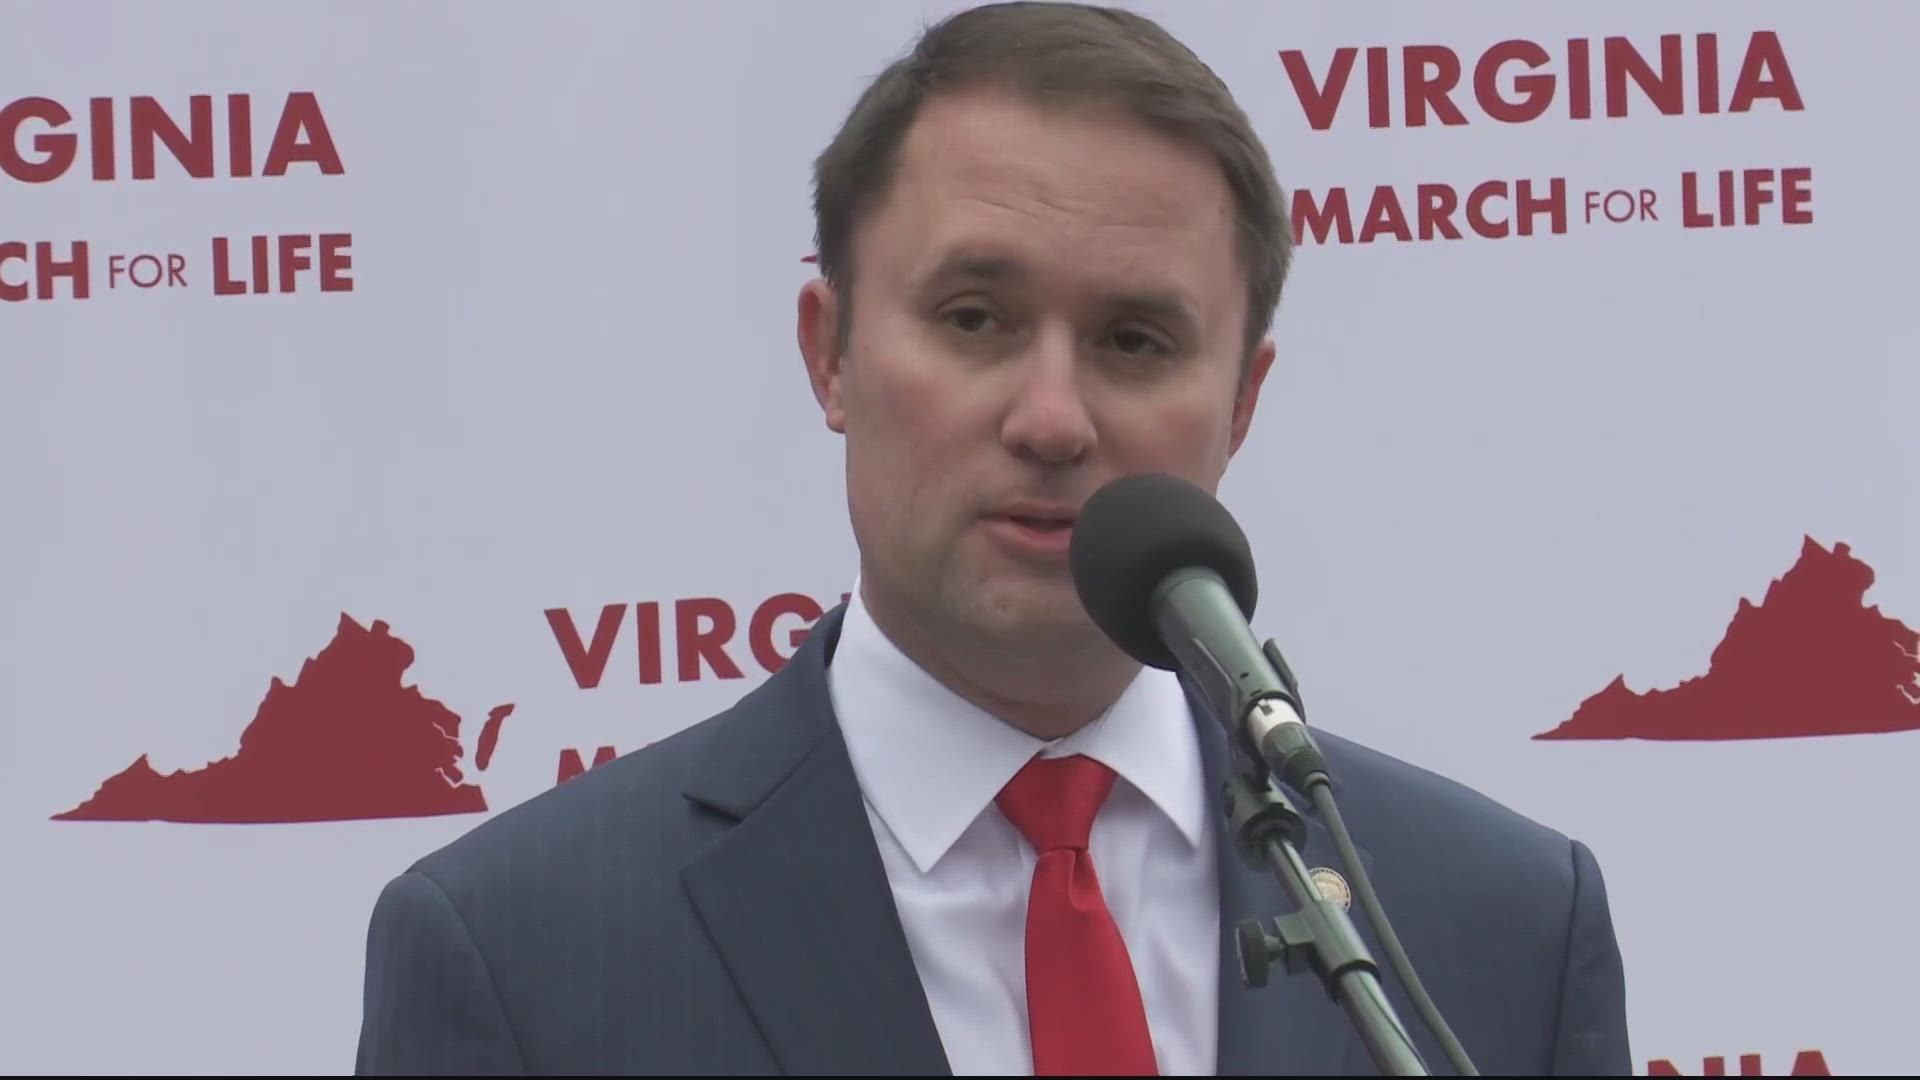 Virginia Attorney General Jason Miyares and Gov. Glenn Youngkin joined the first March for Life rally in Richmond since the U.S. Supreme Court overturned Roe v.